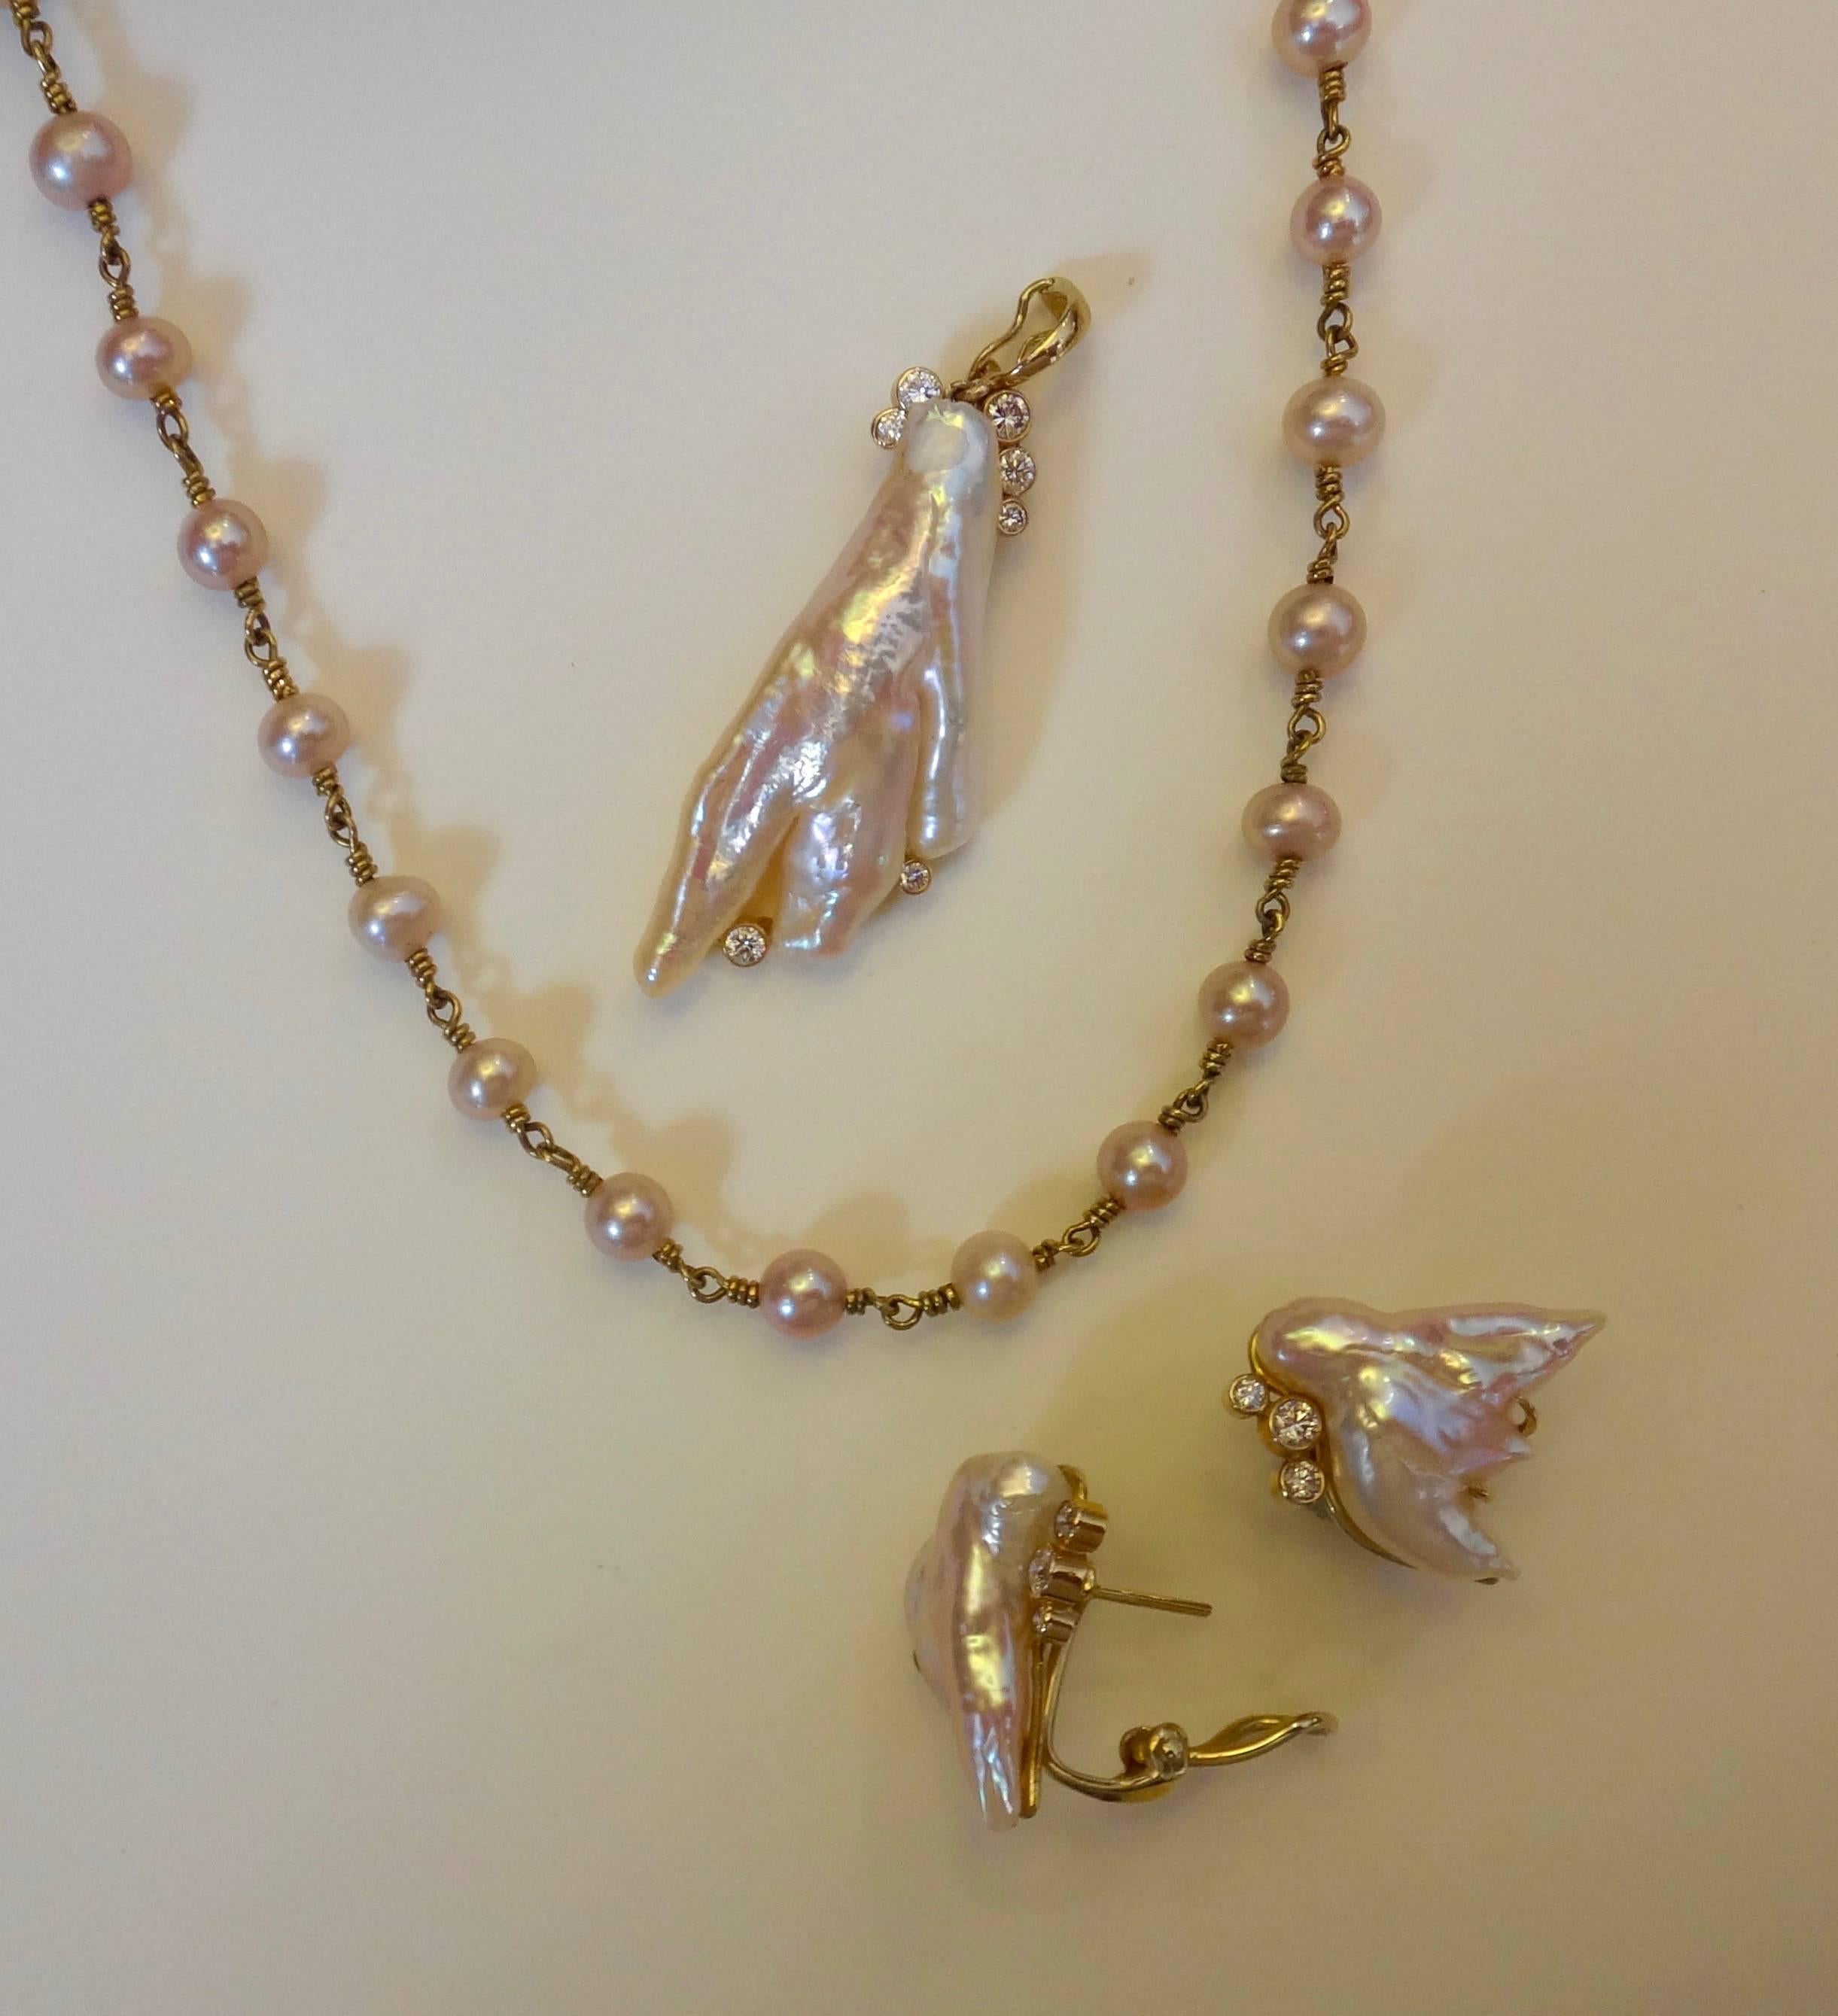 Three highly baroque freshwater pearls were the inspiration for this Angel Wing pearl suite consisting of pendant, necklace and earrings.  The pearls are a delicate shell pink color and possess high luster.  The white diamonds are bezel set.  All